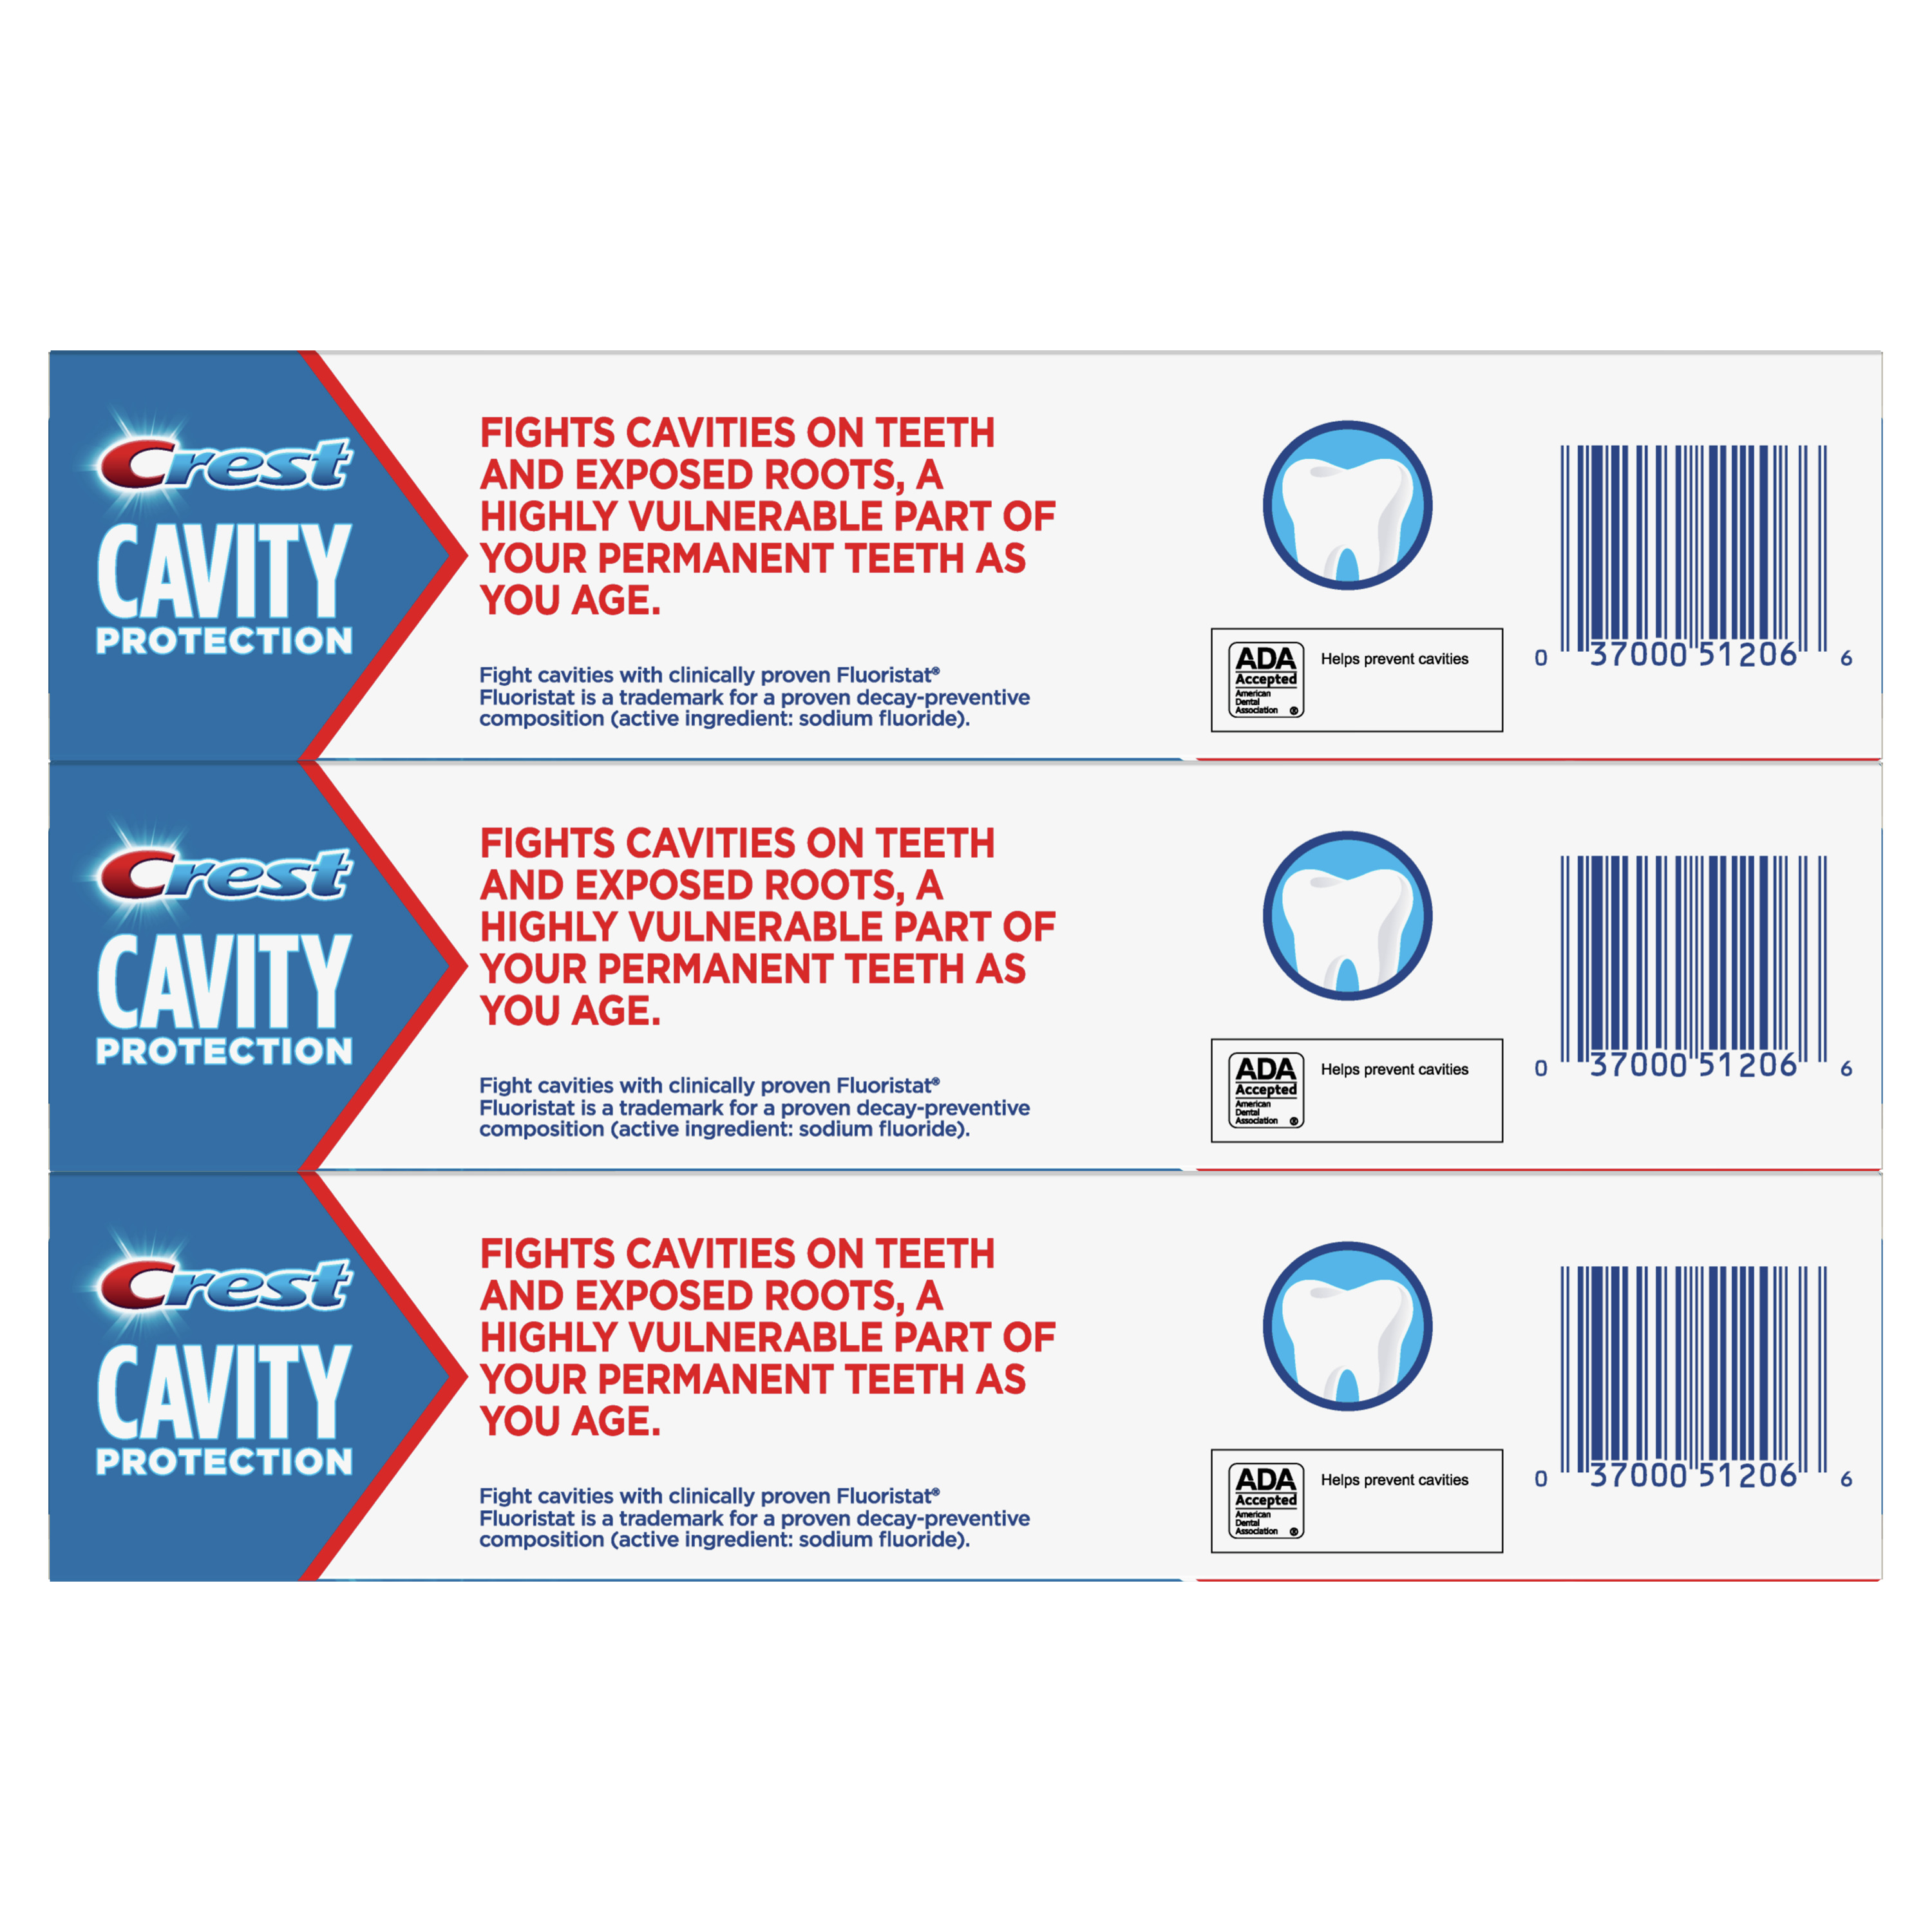 Crest Cavity Protection Toothpaste, Regular Paste, 5.7 oz, 3 Pack - image 2 of 7